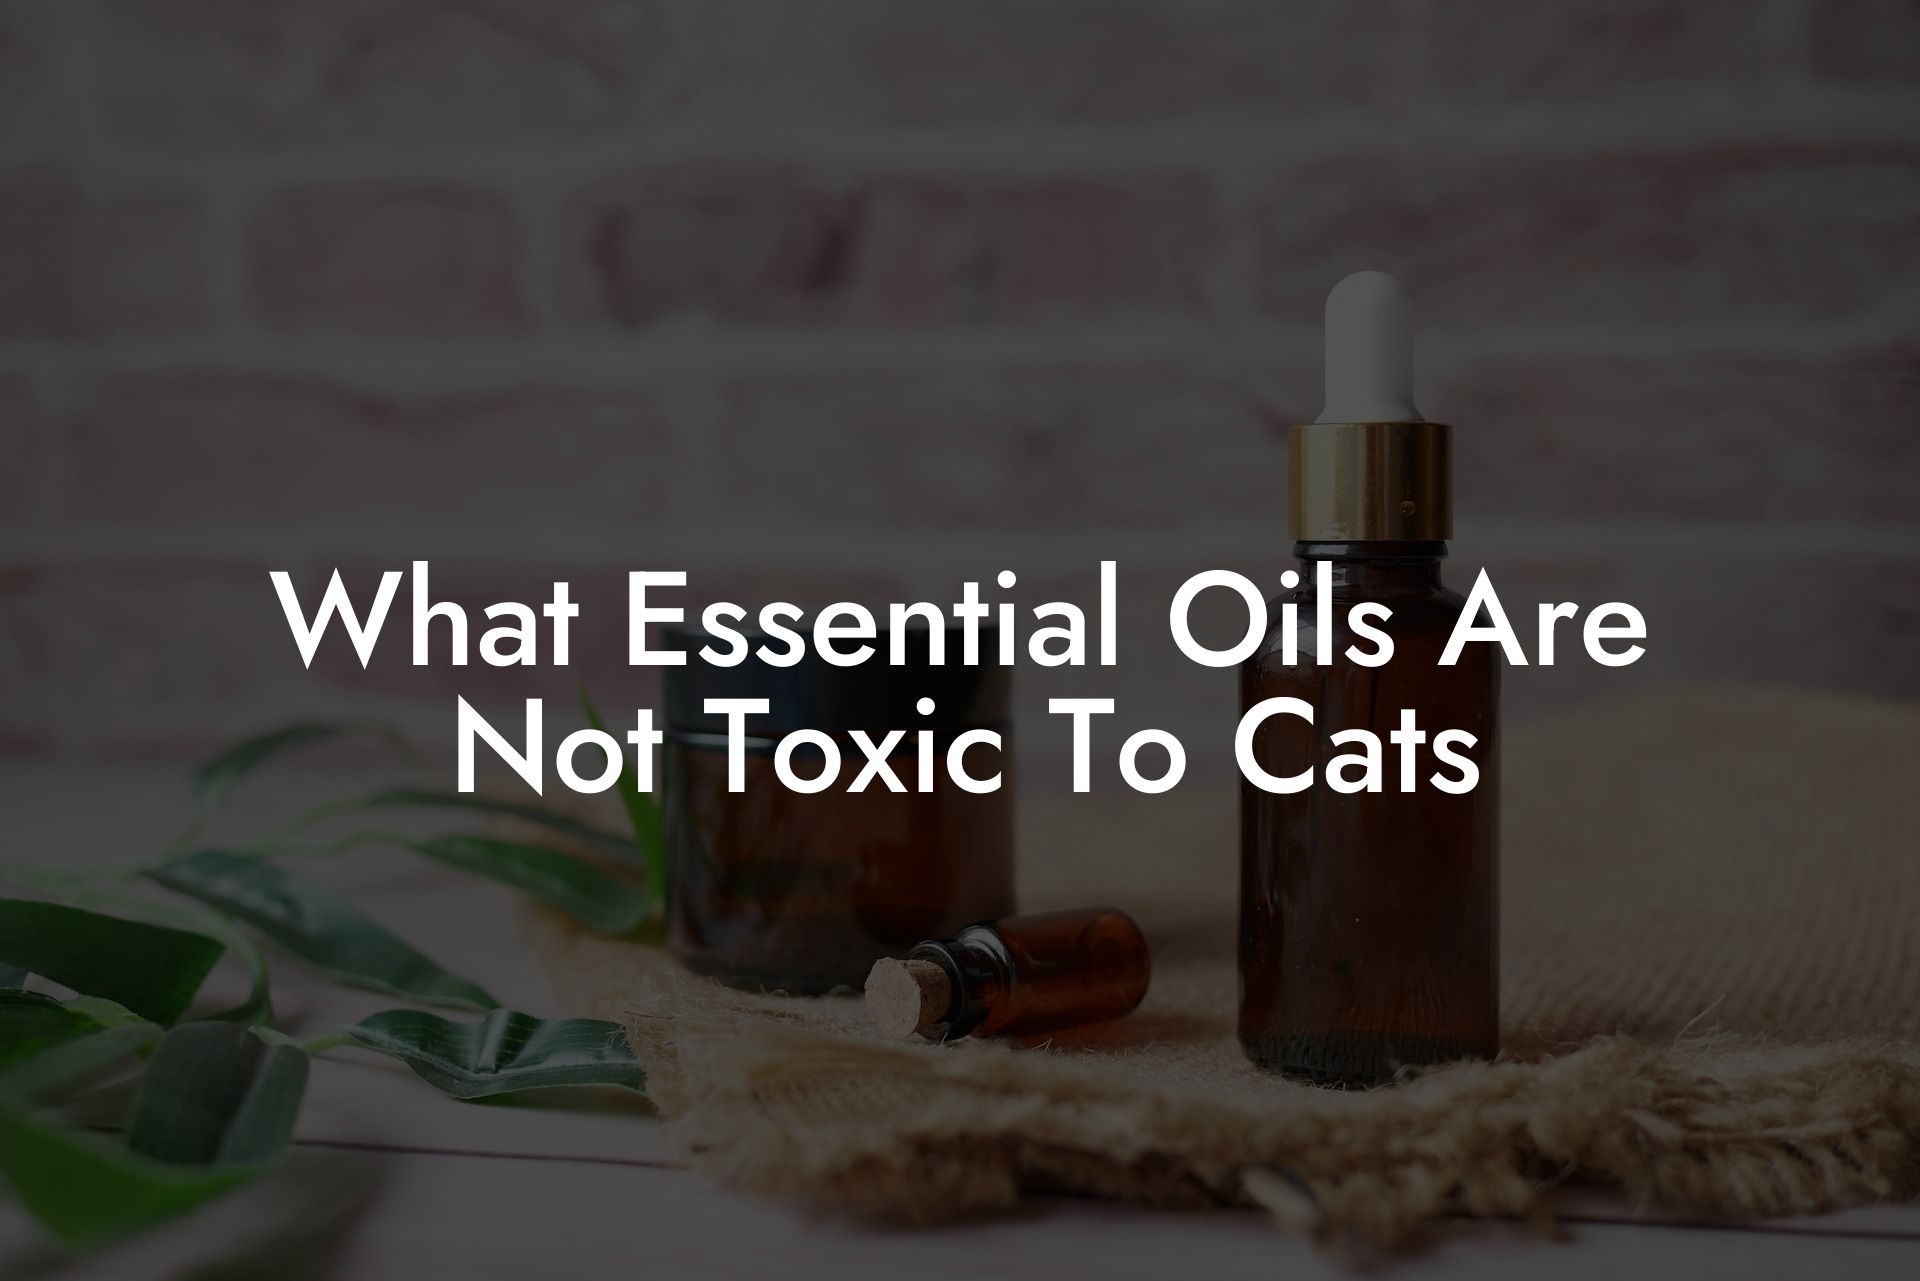 What Essential Oils Are Not Toxic To Cats